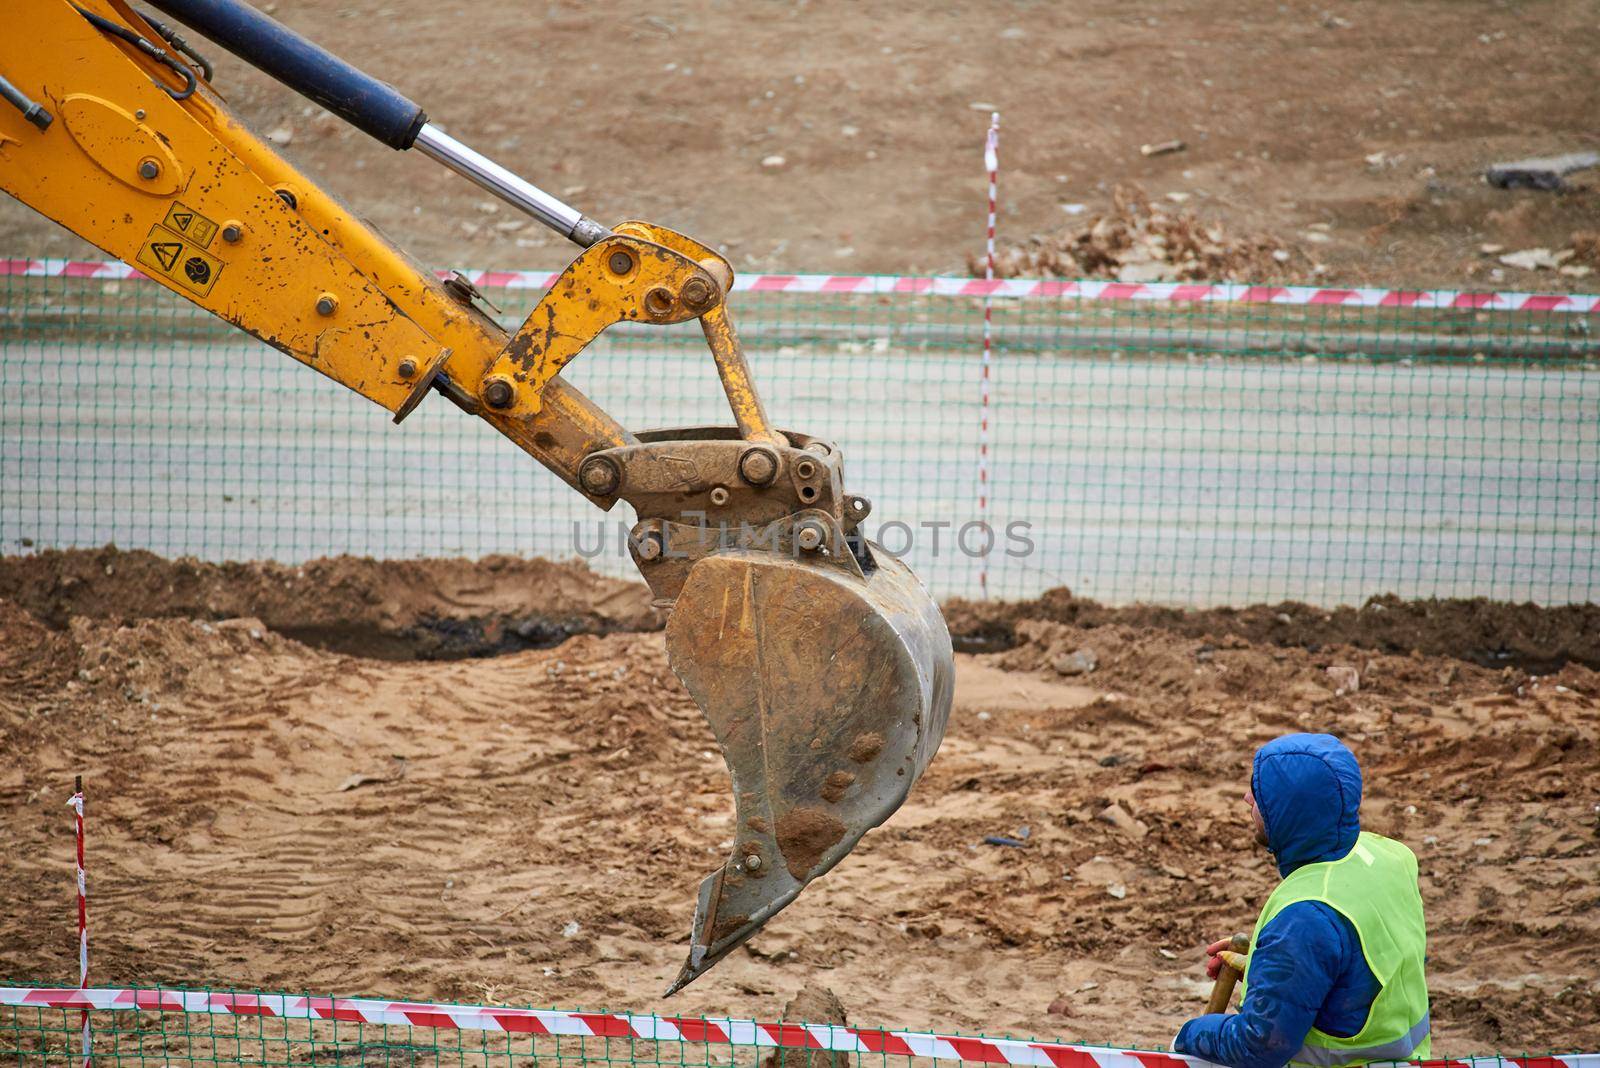 Astrakhan, Russia - 02.15.2021: A worker in a blue jacket and green signal vest he watches the backhoe bucket dig into the ground